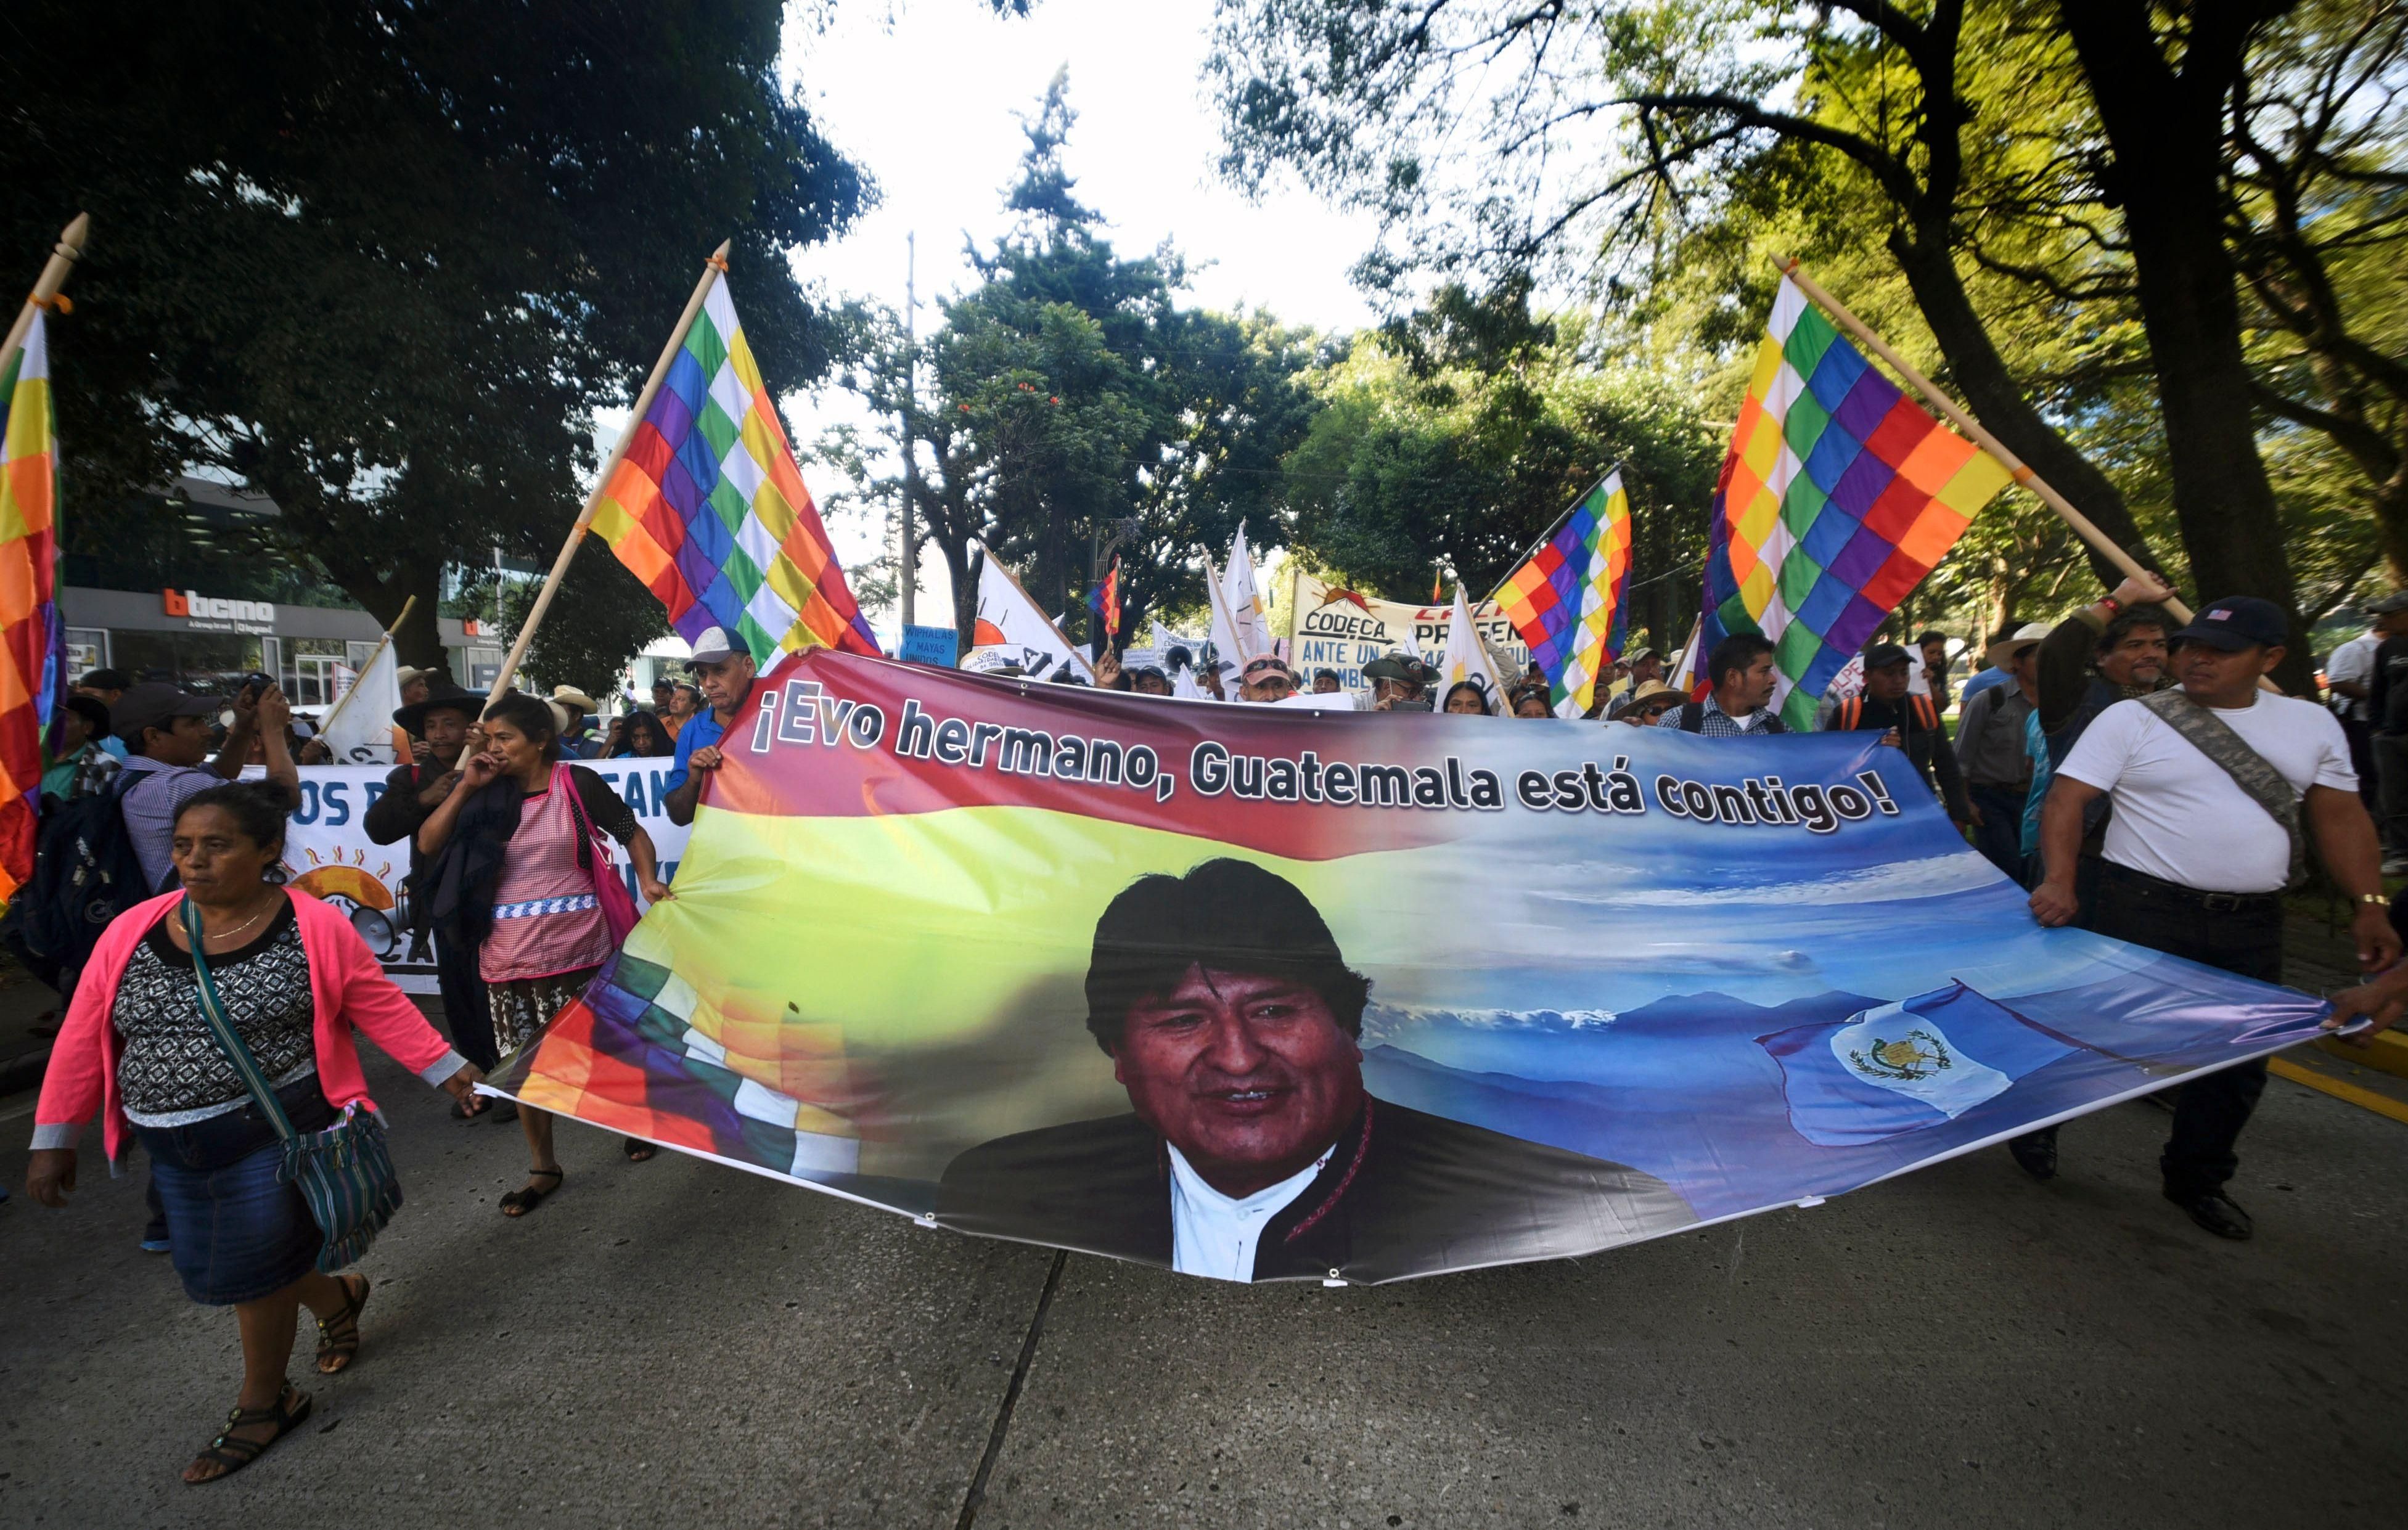 Guatemalan civilian and peasants organizations demonstrate in front of US Embassy in support of former Bolivian President Evo Morales, in Guatemala City, on November 14, 2019. (Photo: ORLANDO ESTRADA/AFP via Getty Images)